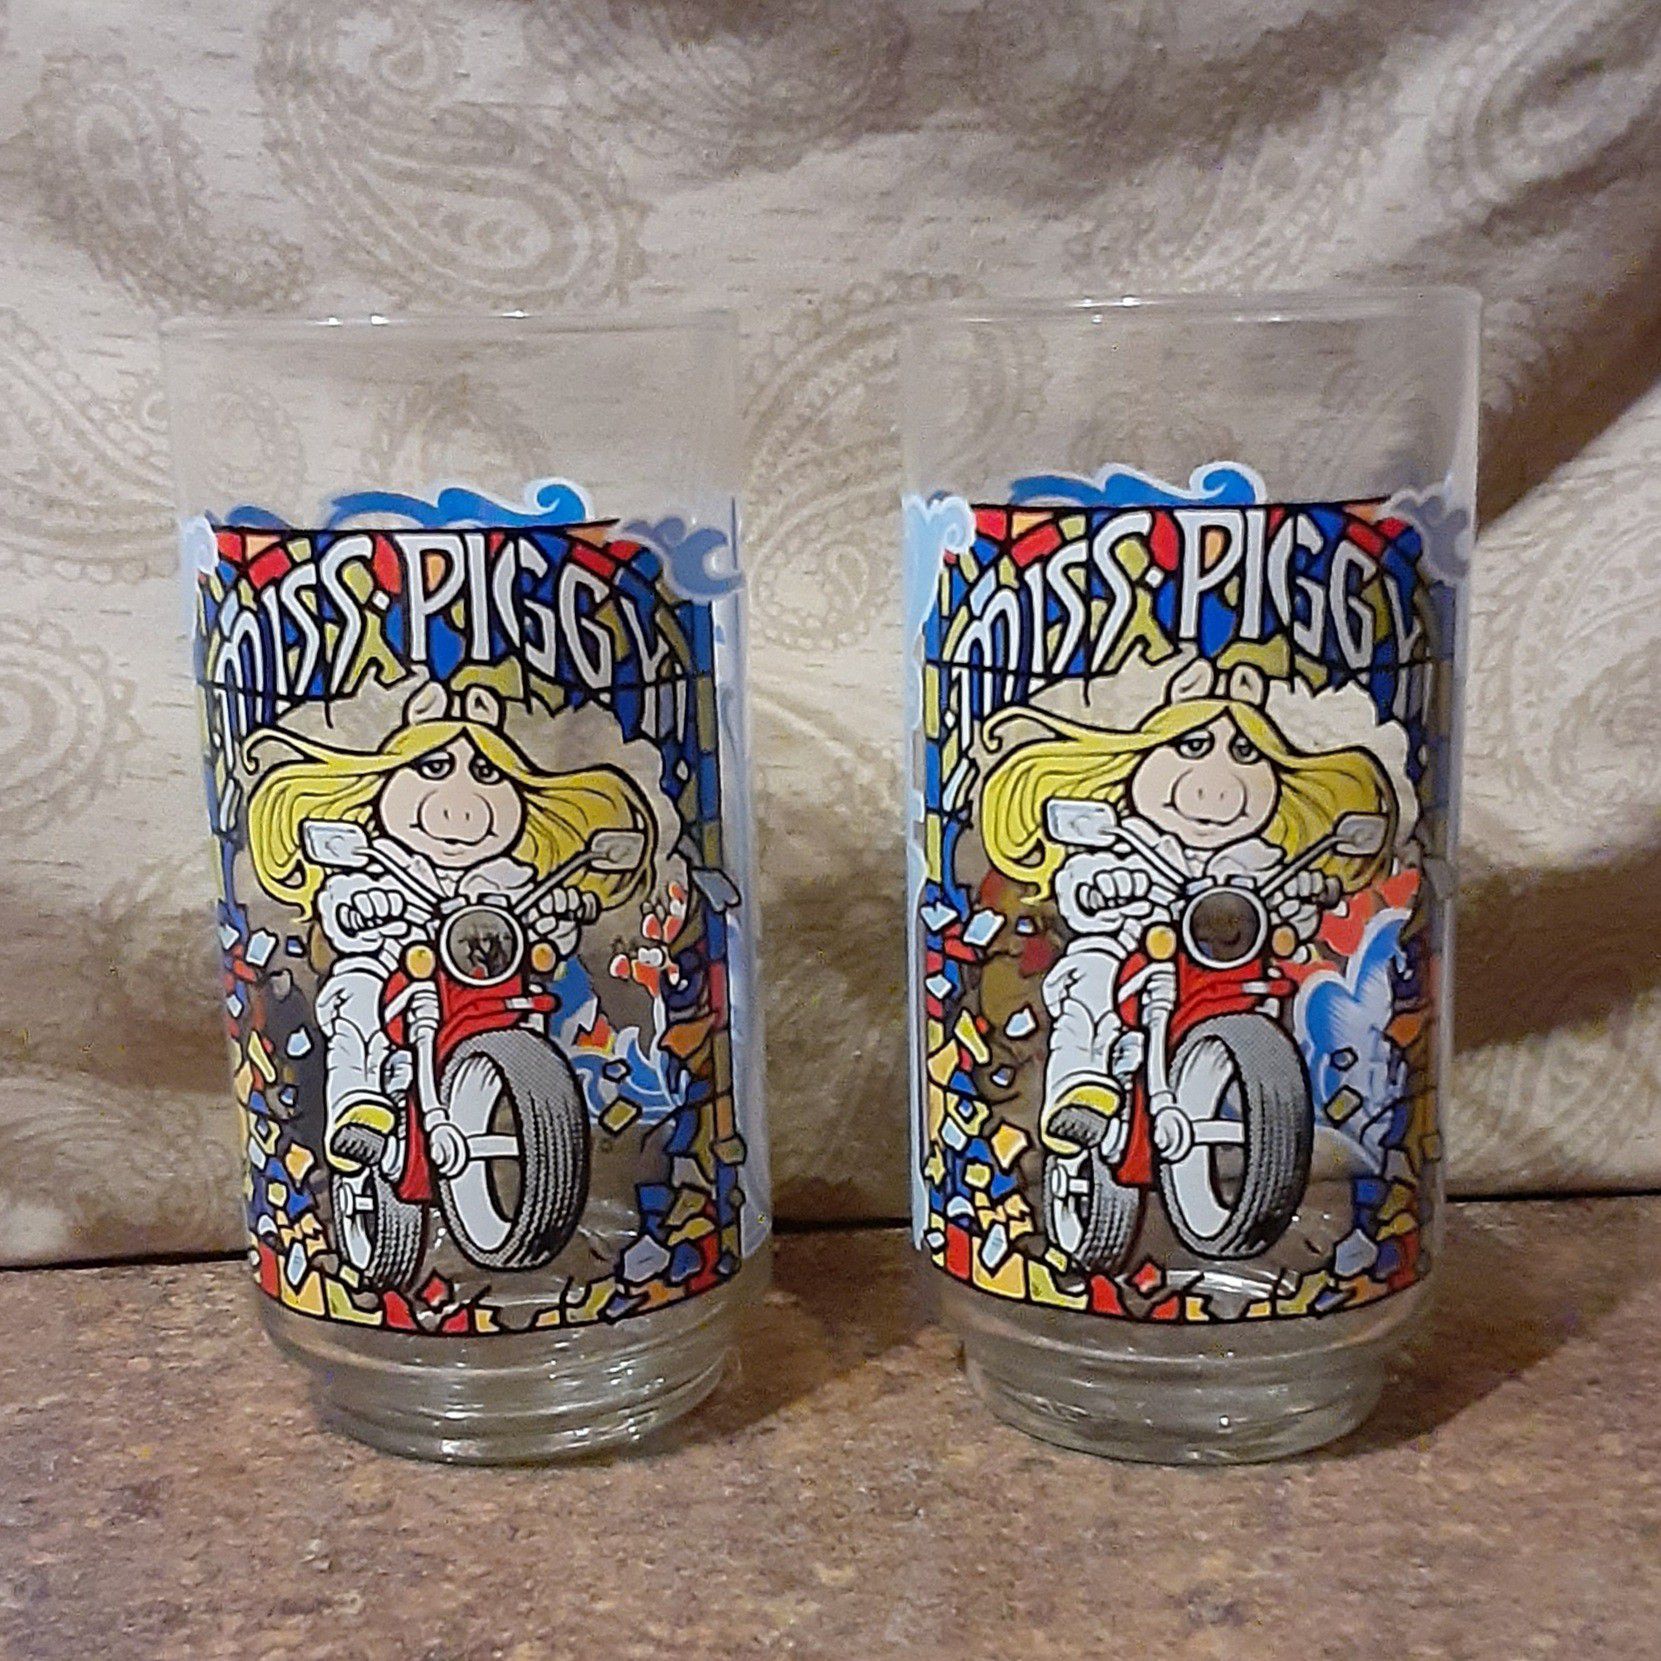 Vintage 1981 Miss Piggy "The Great Muppet Caper" Henson/McDonald's Collectible Glass (Lot of 2) - VGC